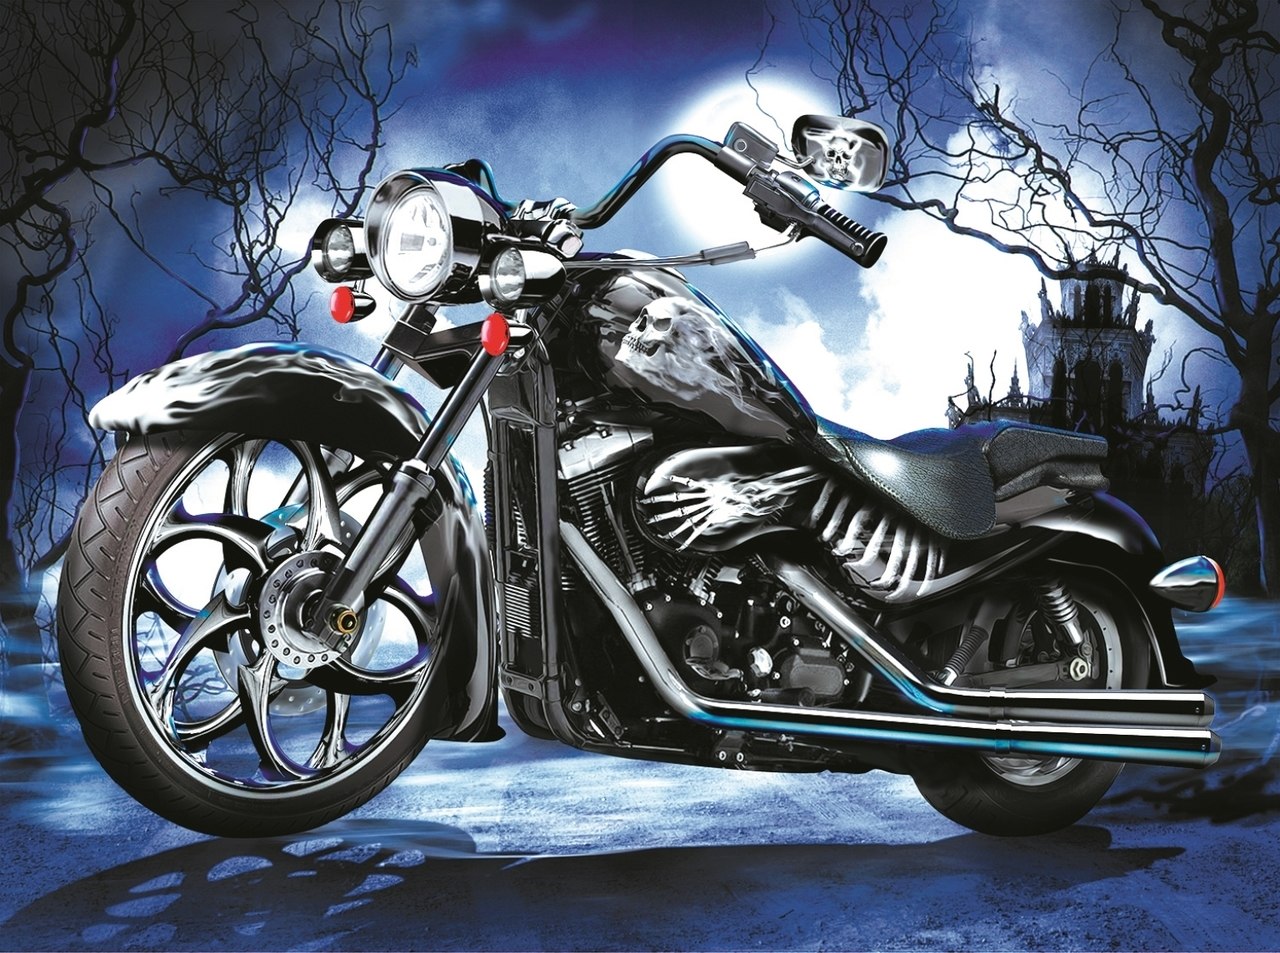 Skeleton Ride - 1000pc Jigsaw Puzzle By Sunsout  			  					NEW - image main